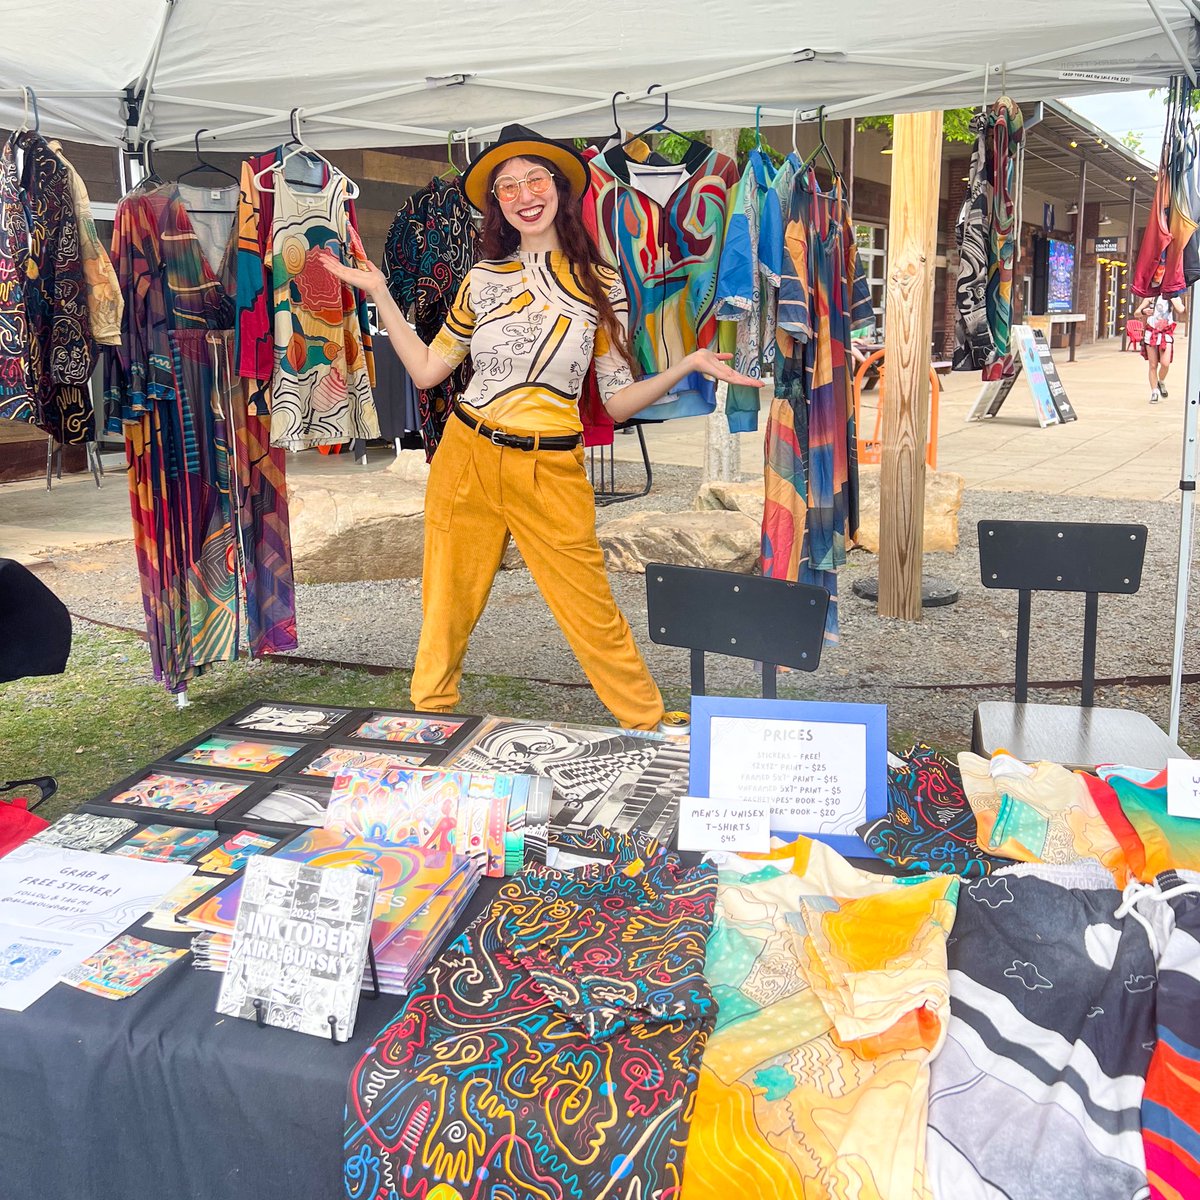 I had such a fantastic time with my art fashion pop up this weekend at the Flipside arts & renaissance festival! ✨